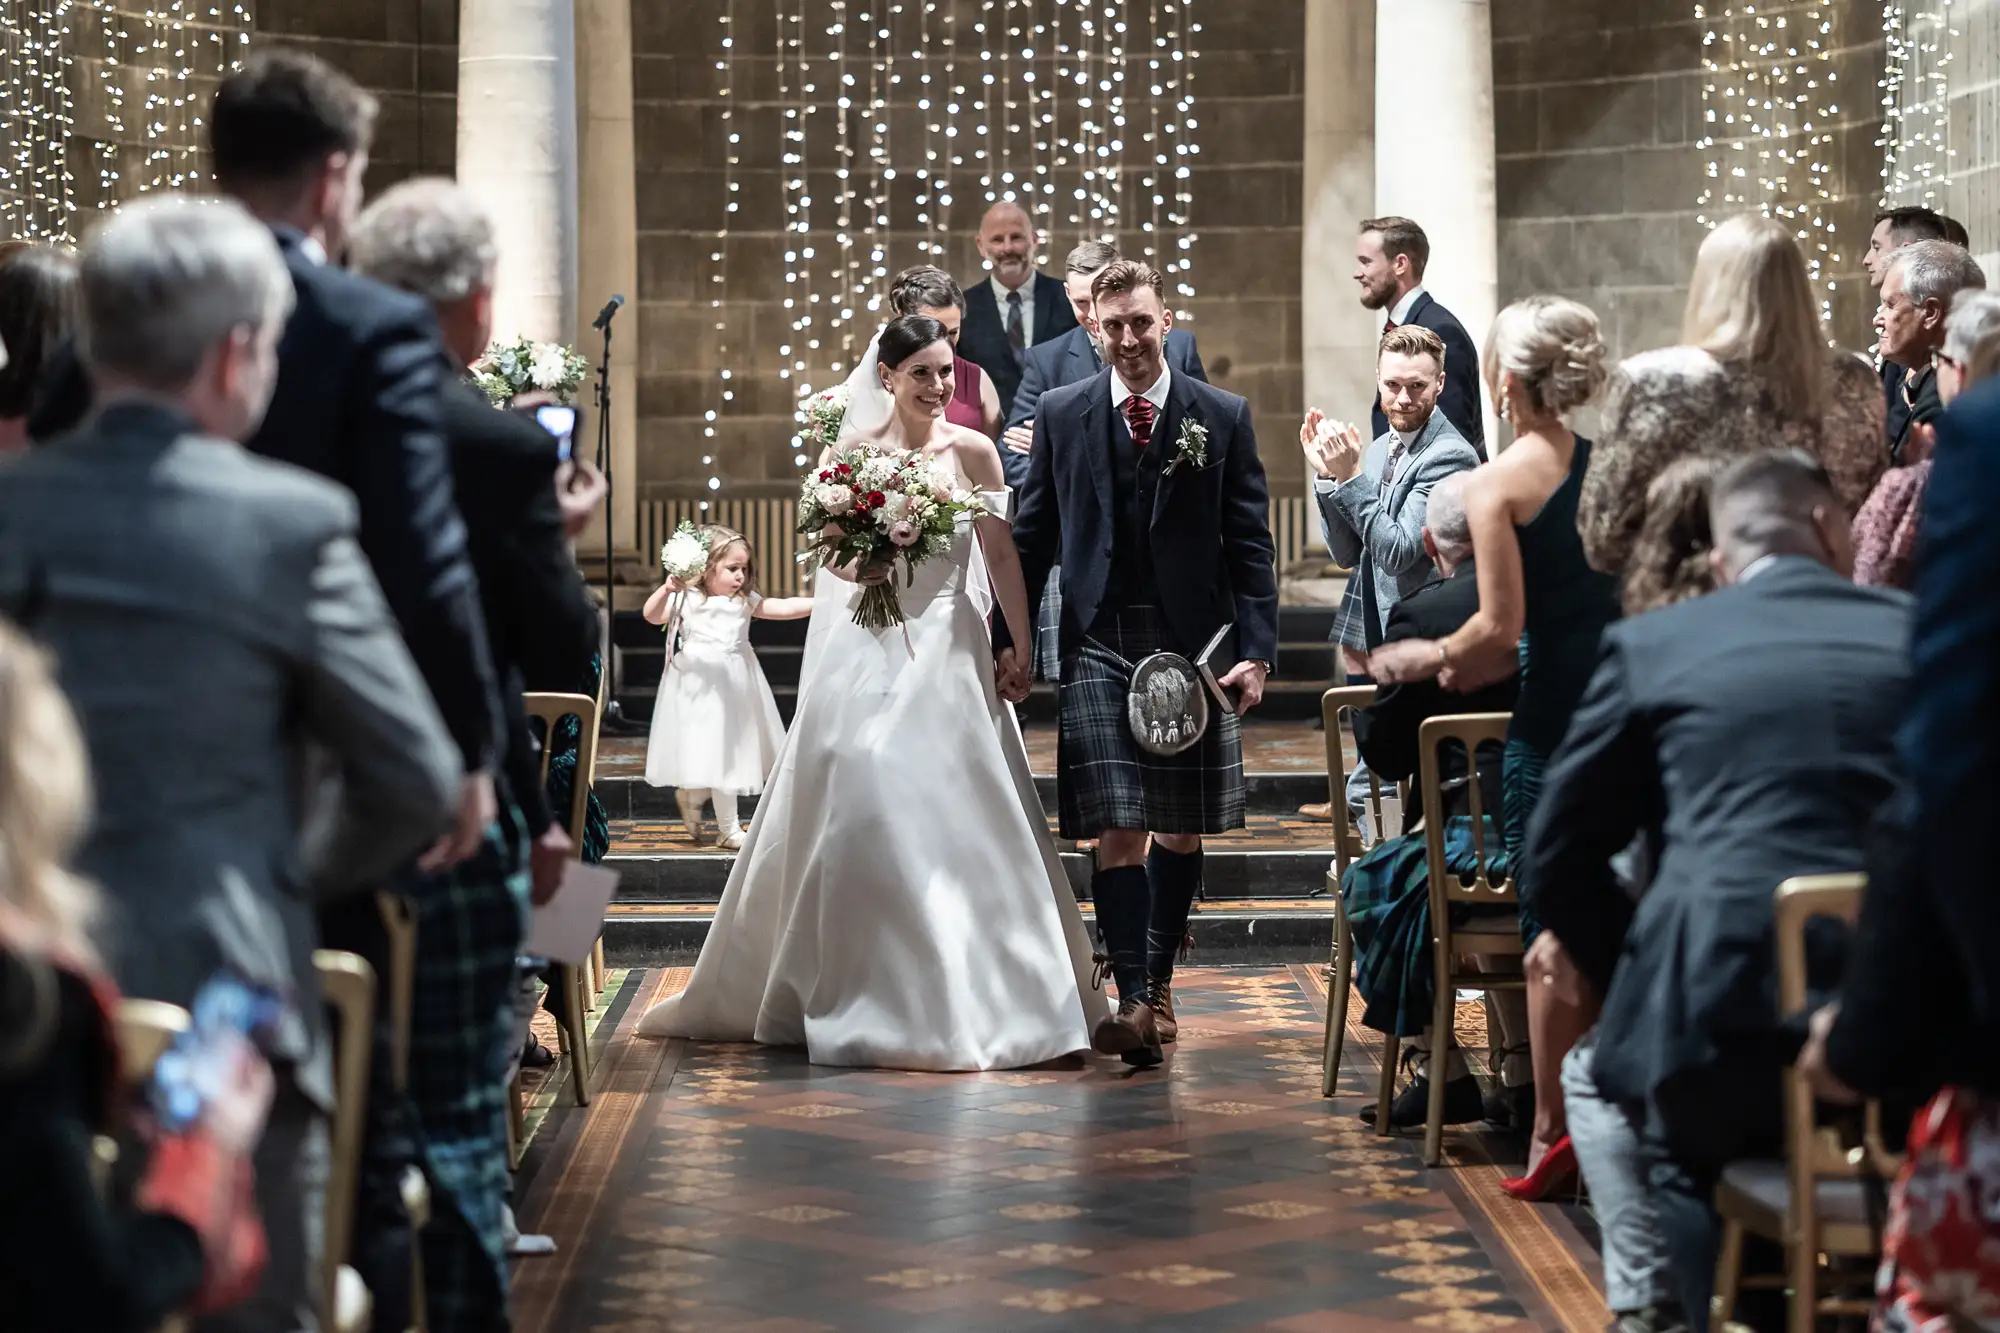 A bride and groom walking down the aisle in a church, the groom in a kilt, surrounded by guests, with string lights and candles in the background.